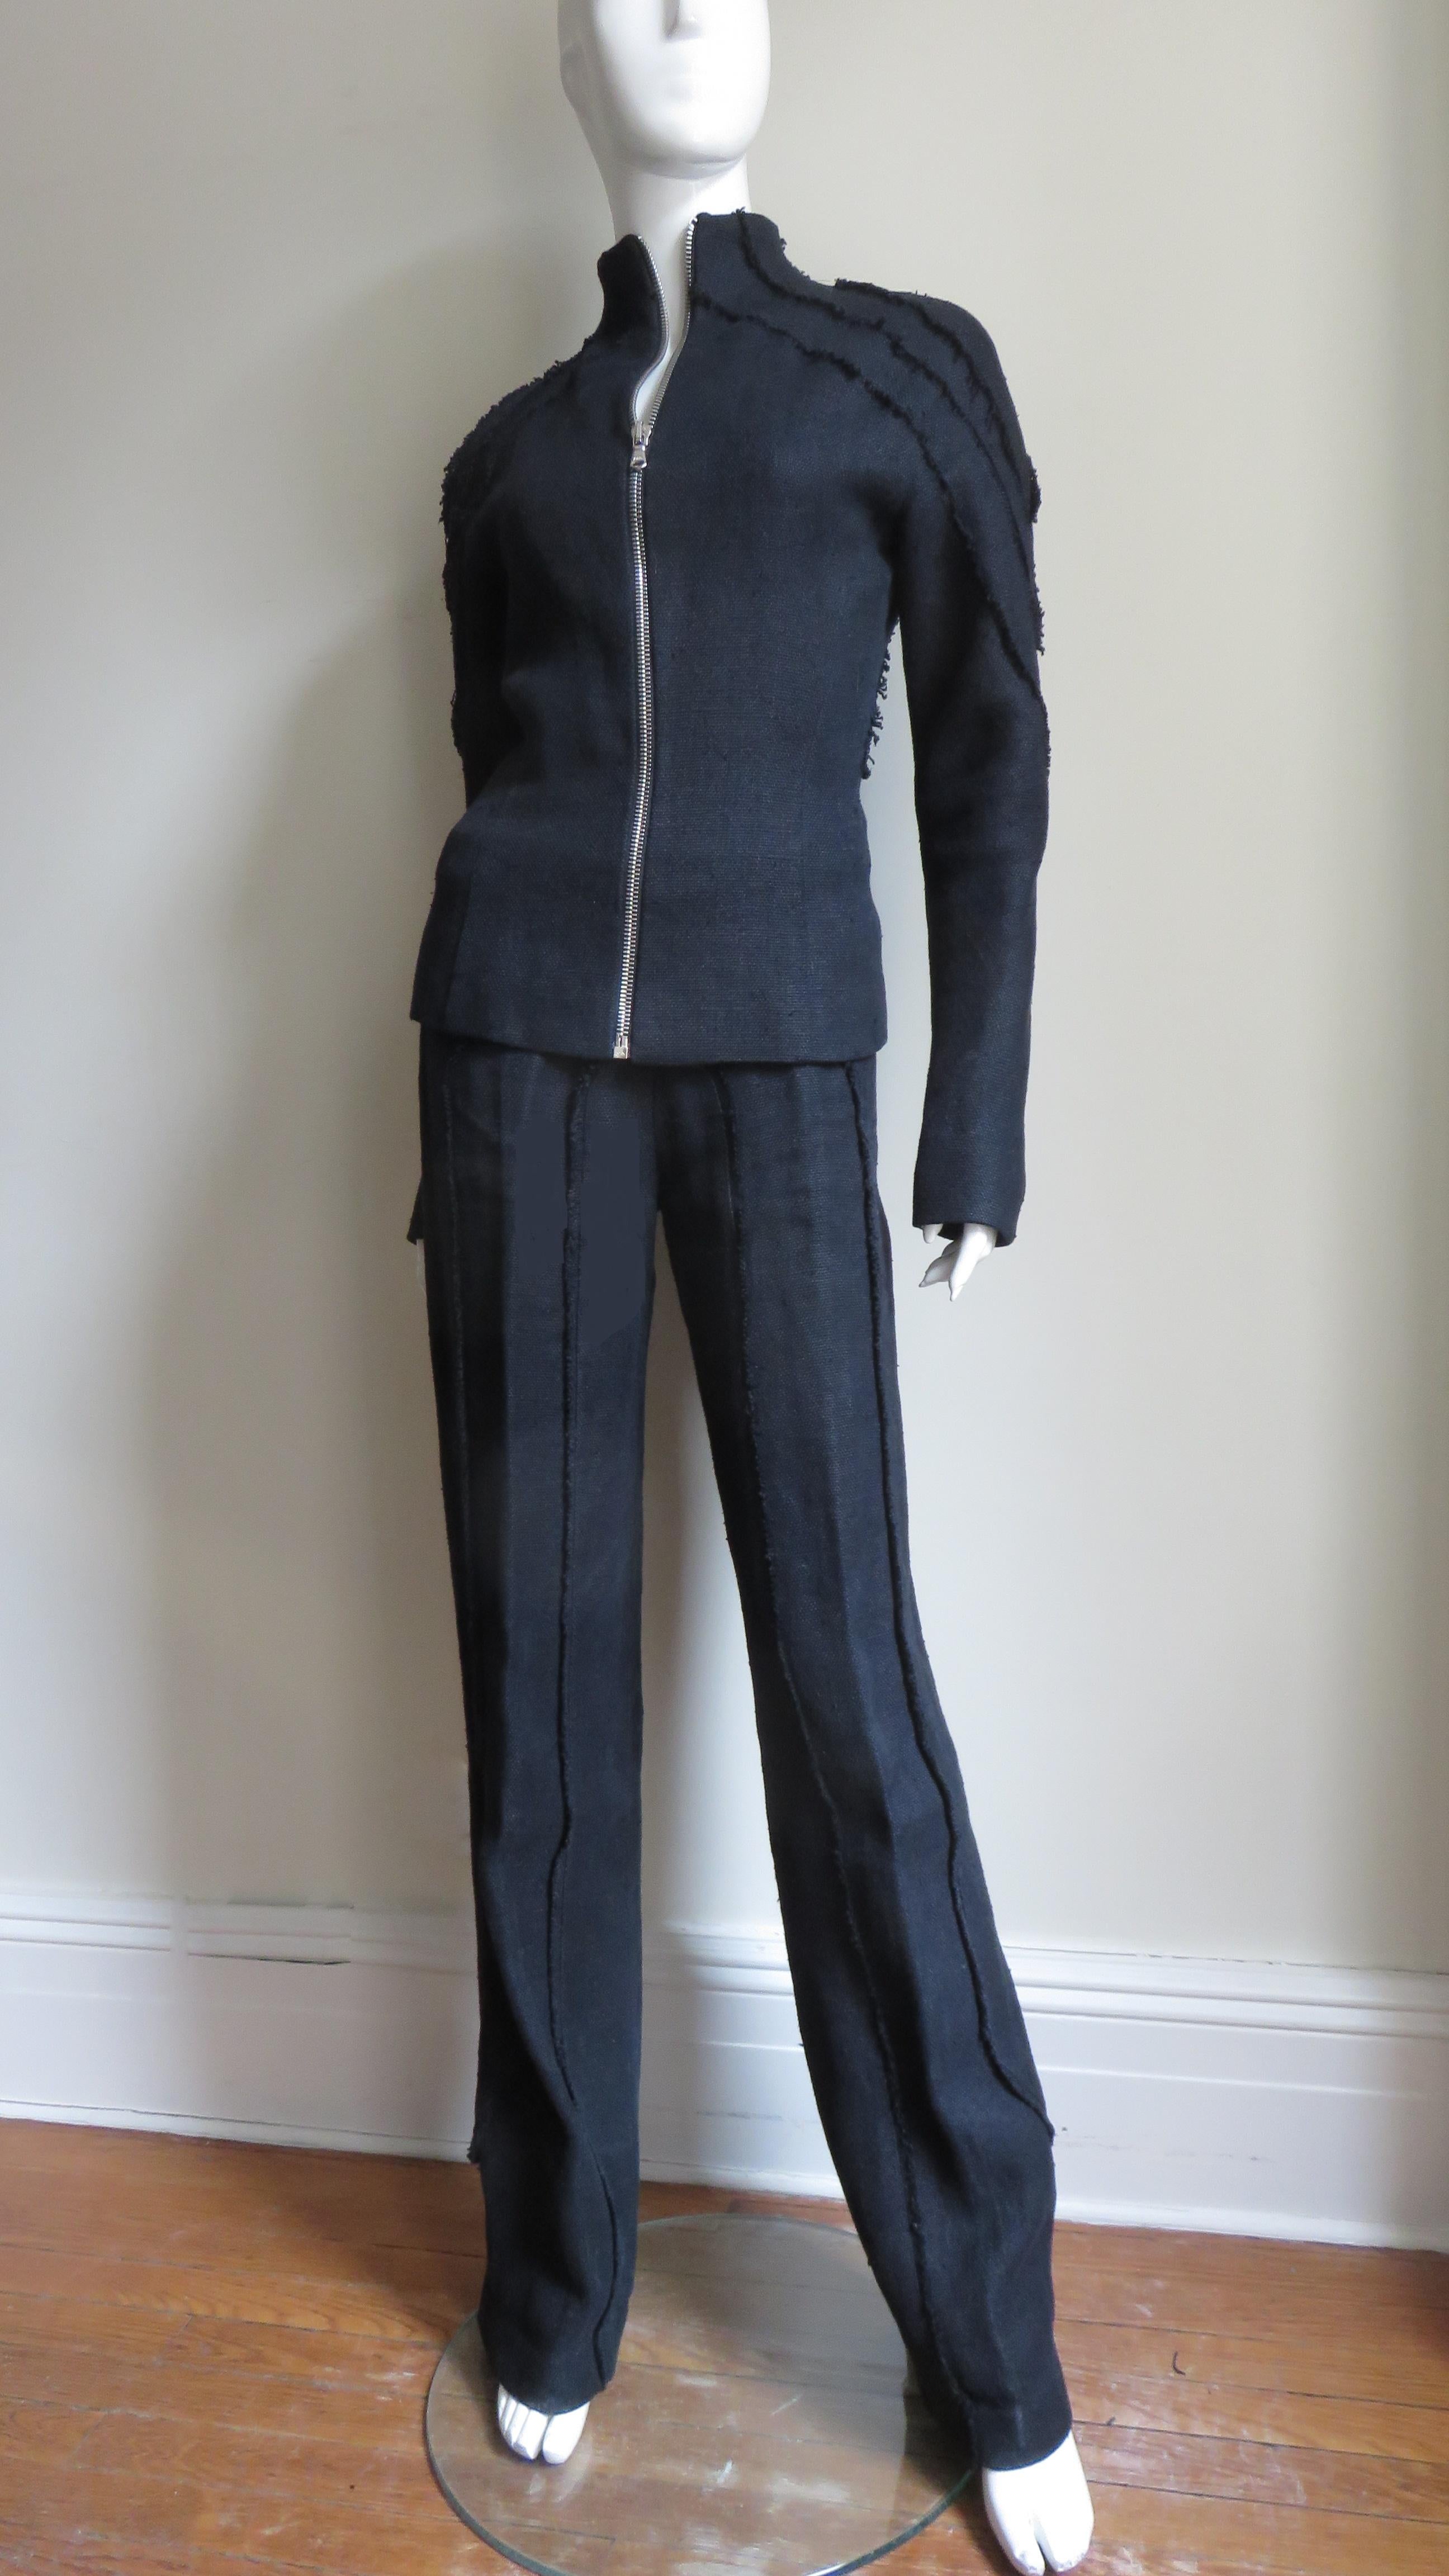 An incredible mid weight black linen jacket and pant set from Alexander McQueen. The jacket has a stand up collar, long sleeves and an elaborate pattern of raw edge panels along the shoulders, sleeves and in flattering angles in the back.  It is